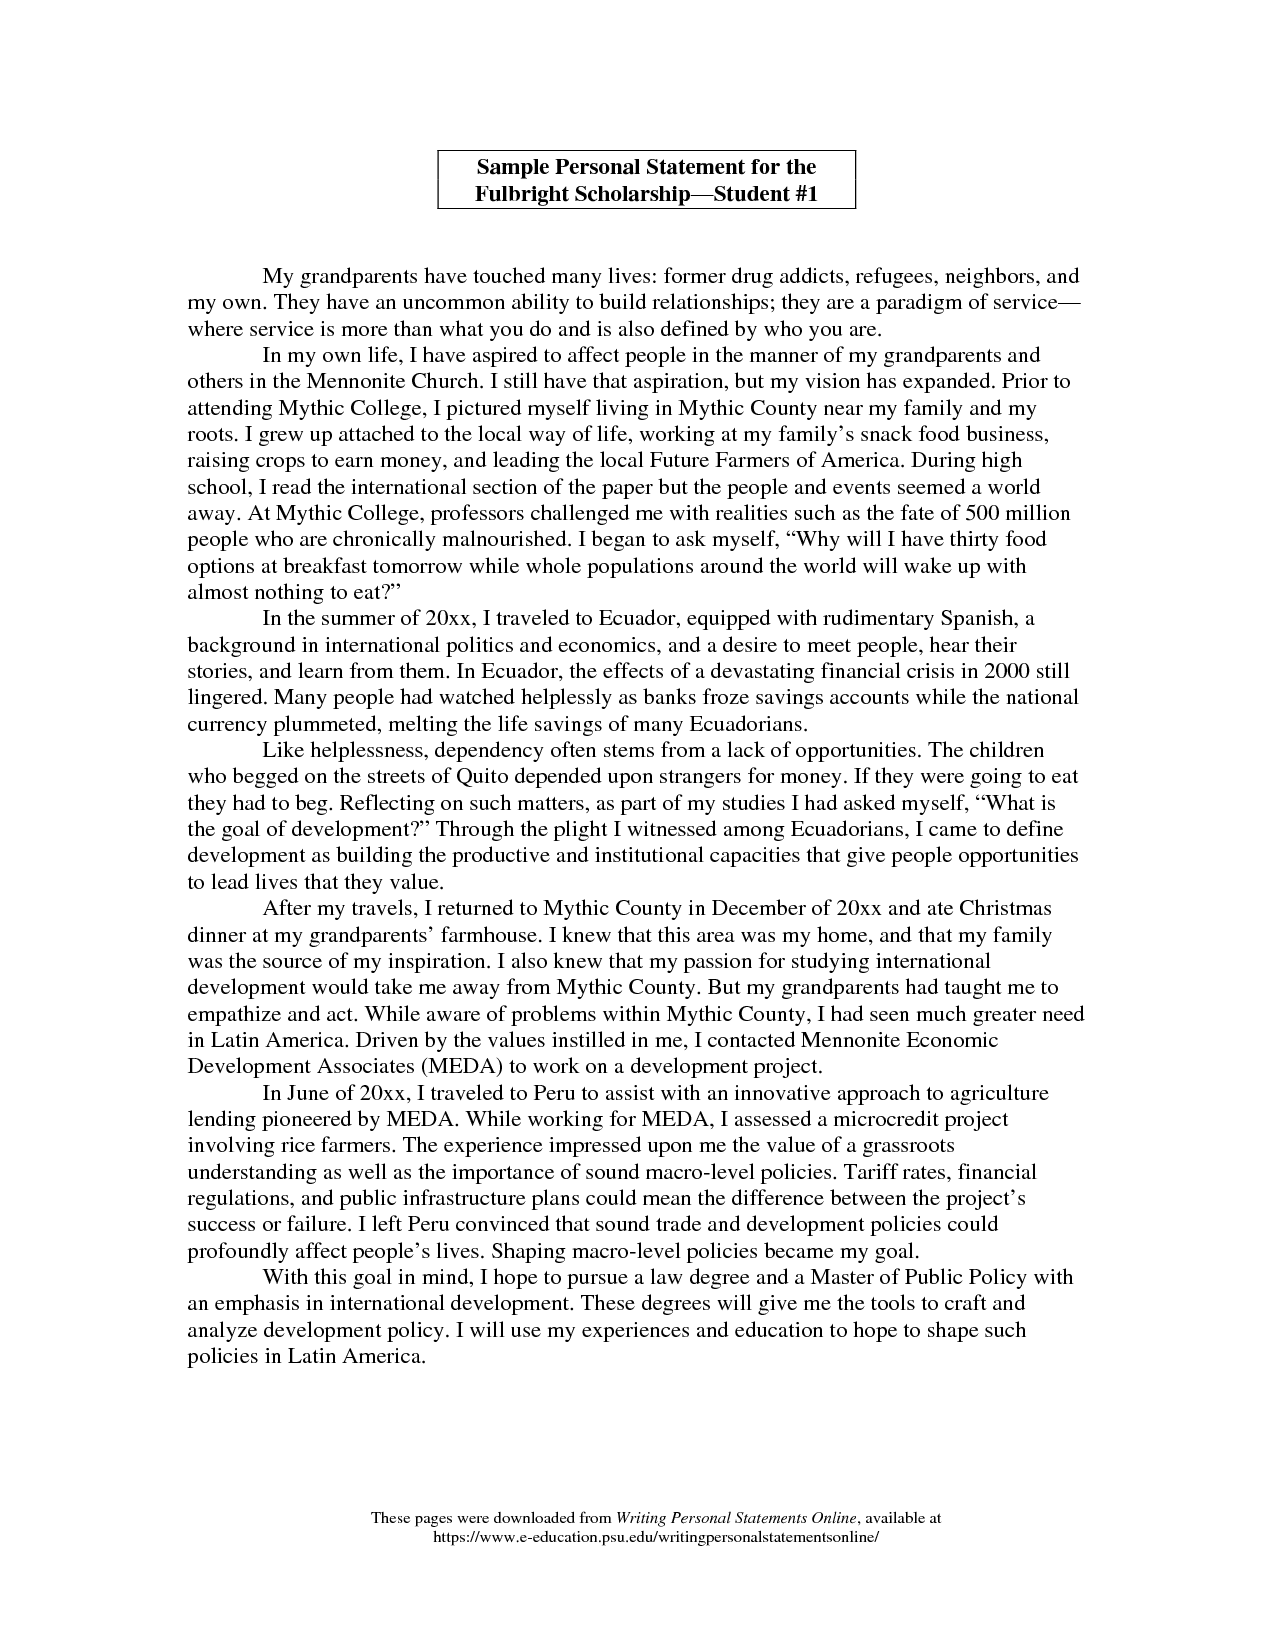 Personal Statement for the Fulbright Scholarship ( Winning Essay ) - Essaysers